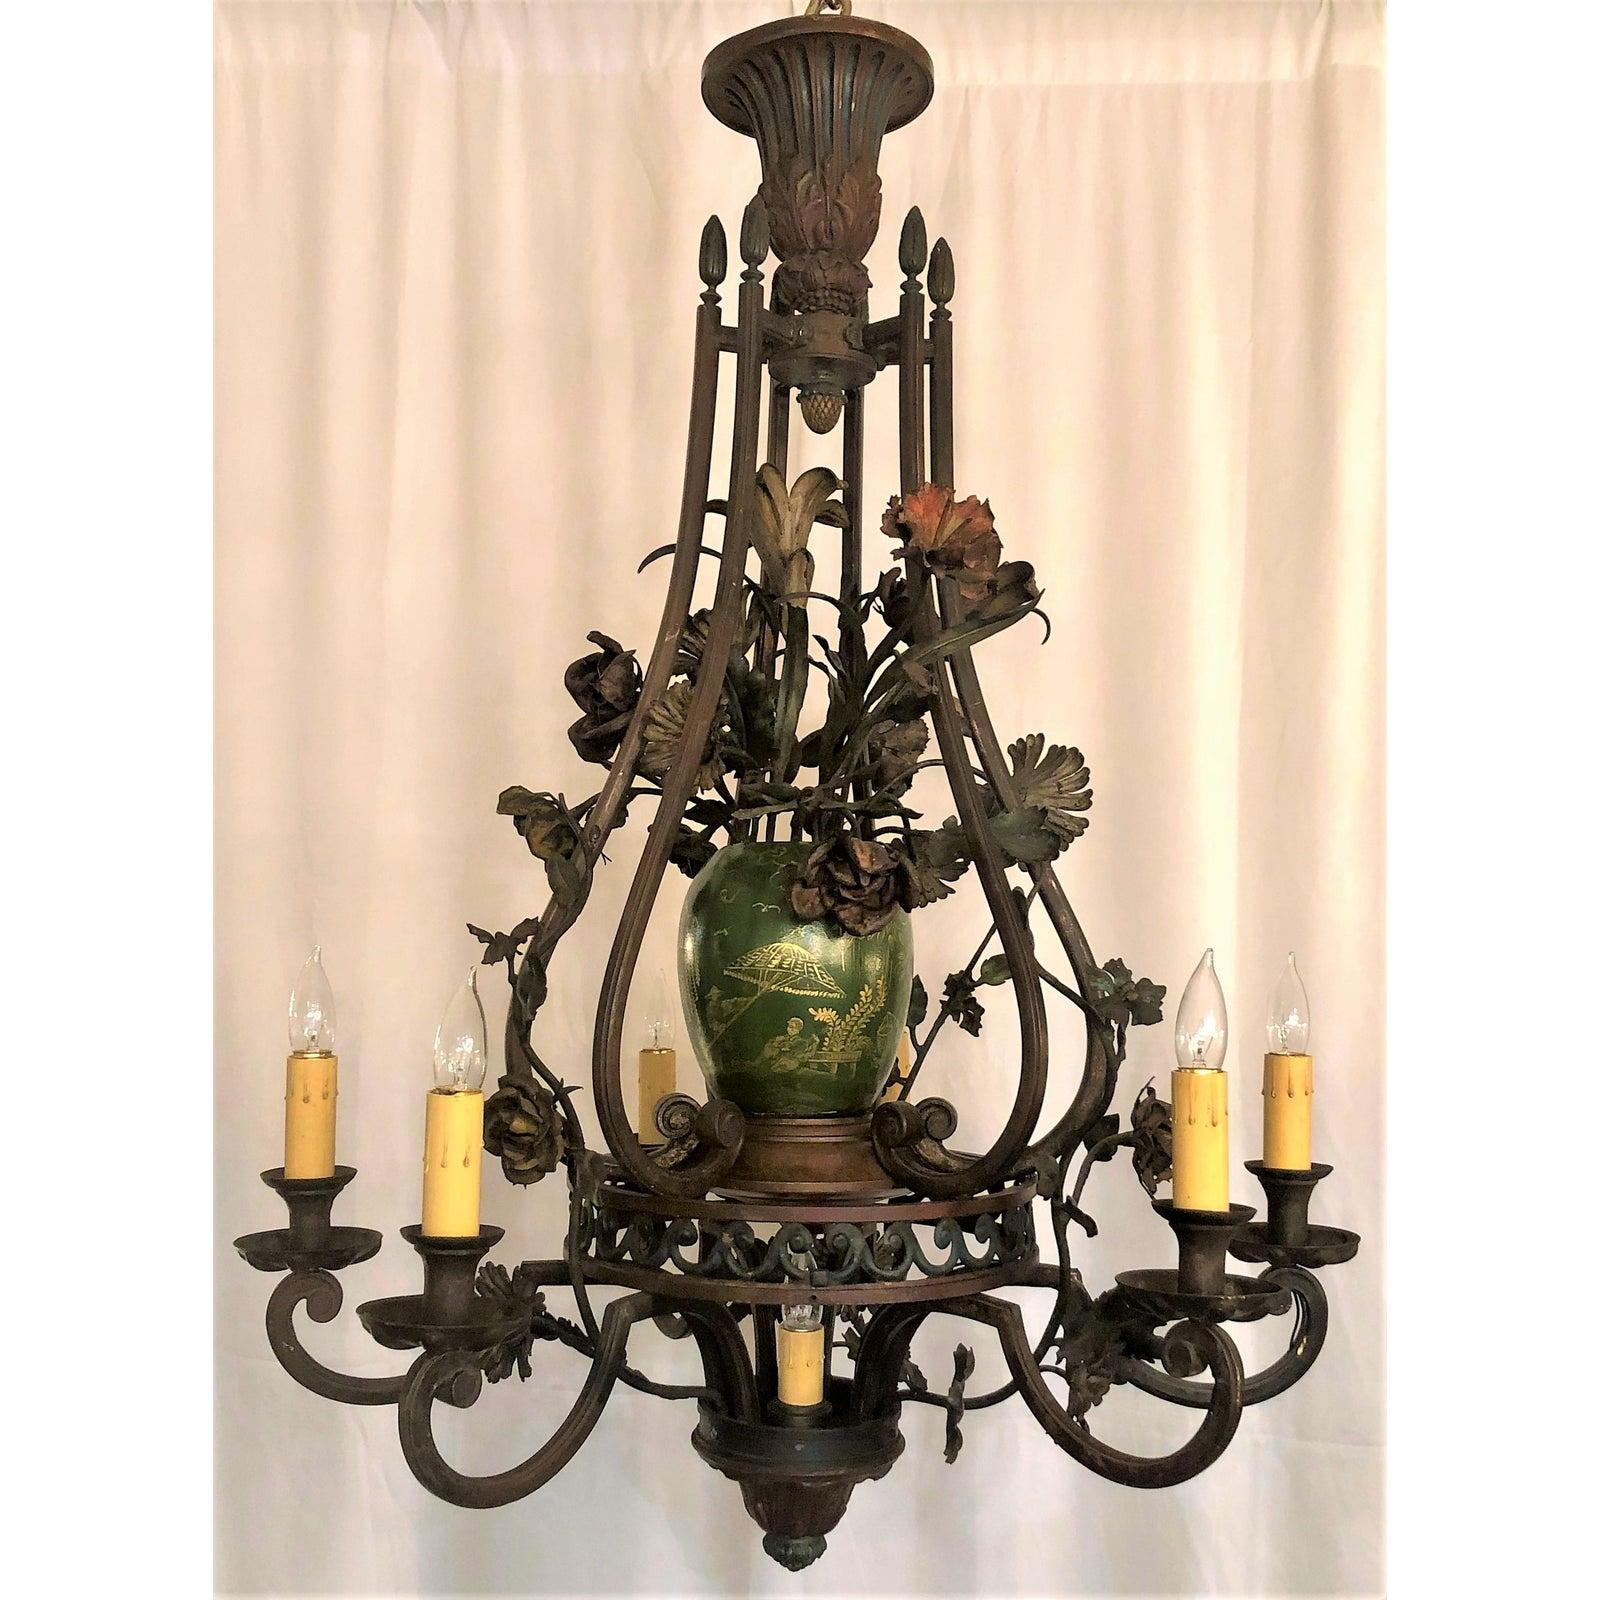 A very handsome piece with decorative touches in the flowers and leaves gracing the fixture.
 